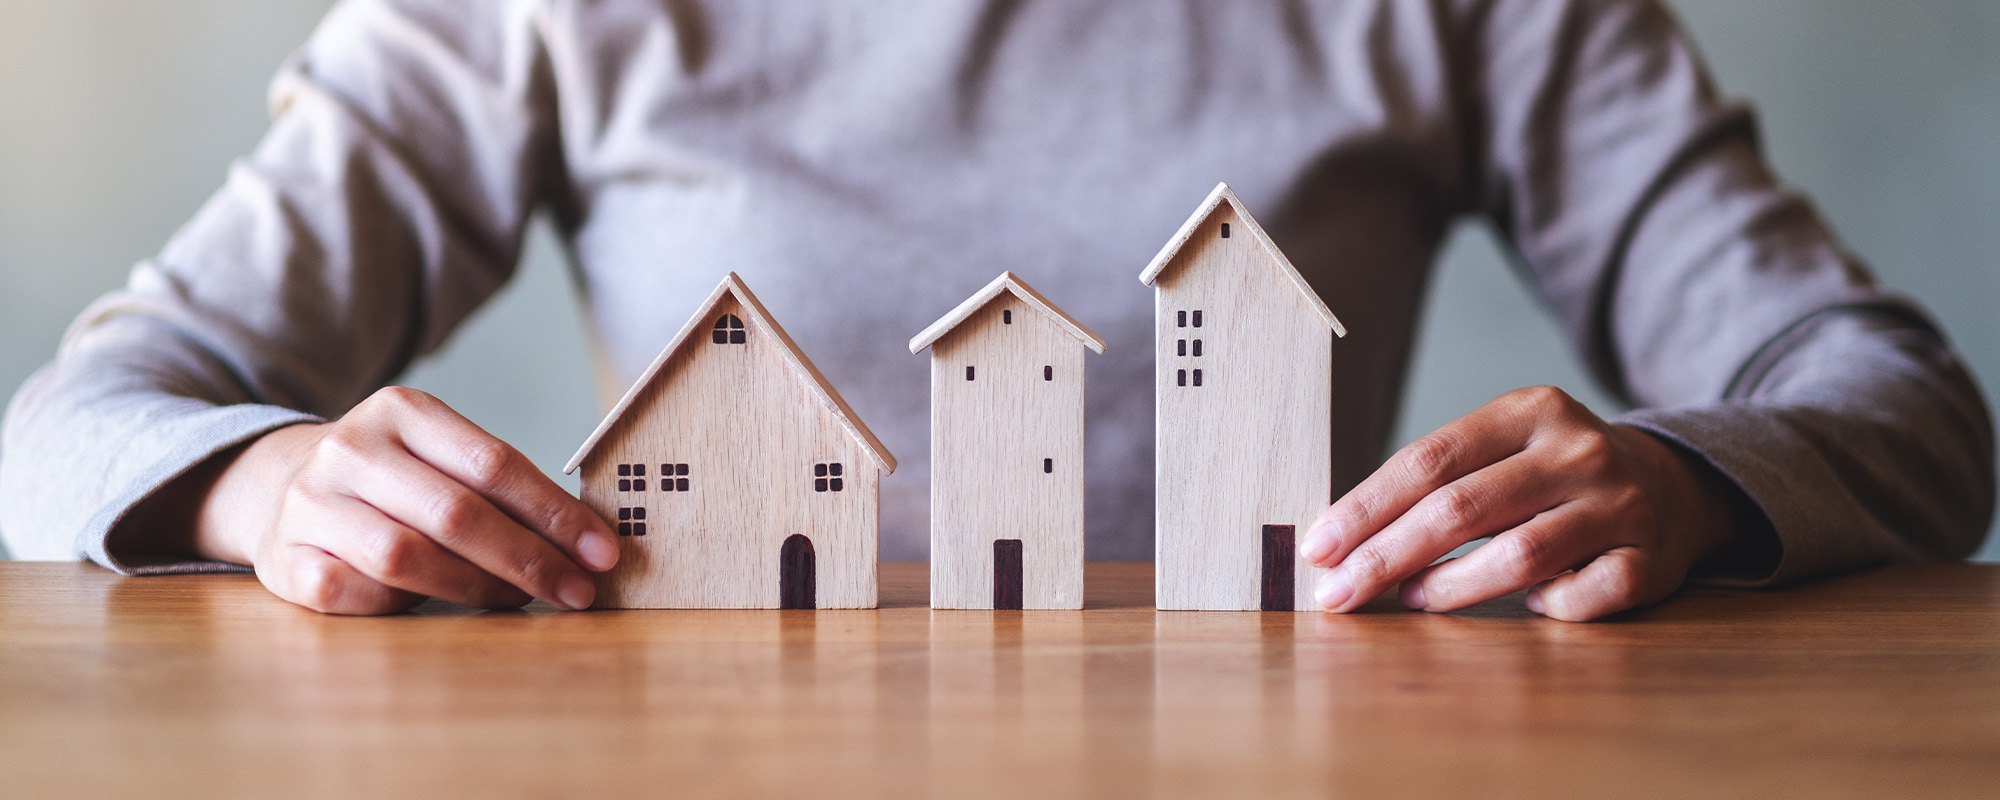 closeup image of a woman holding wooden house models on the table